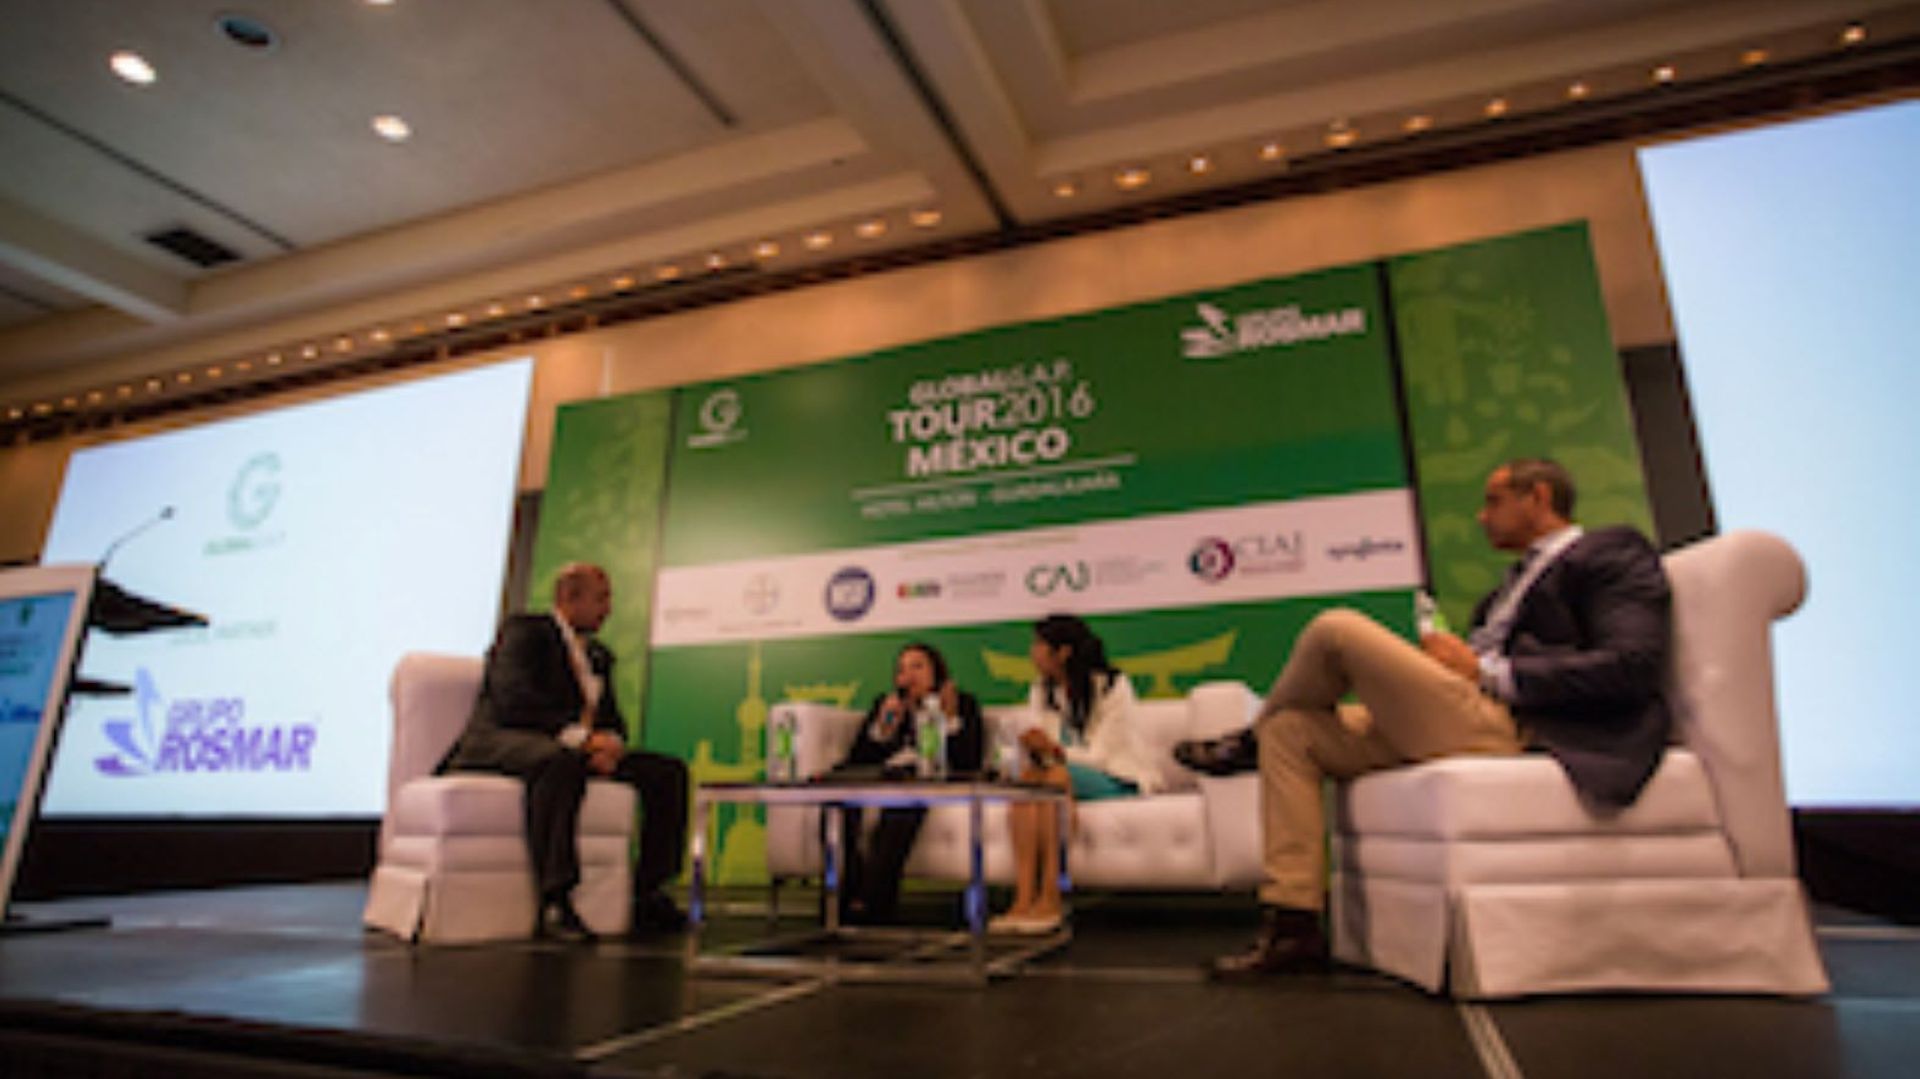 Image of a panel discussion at the 2016 TOUR stop in Mexico